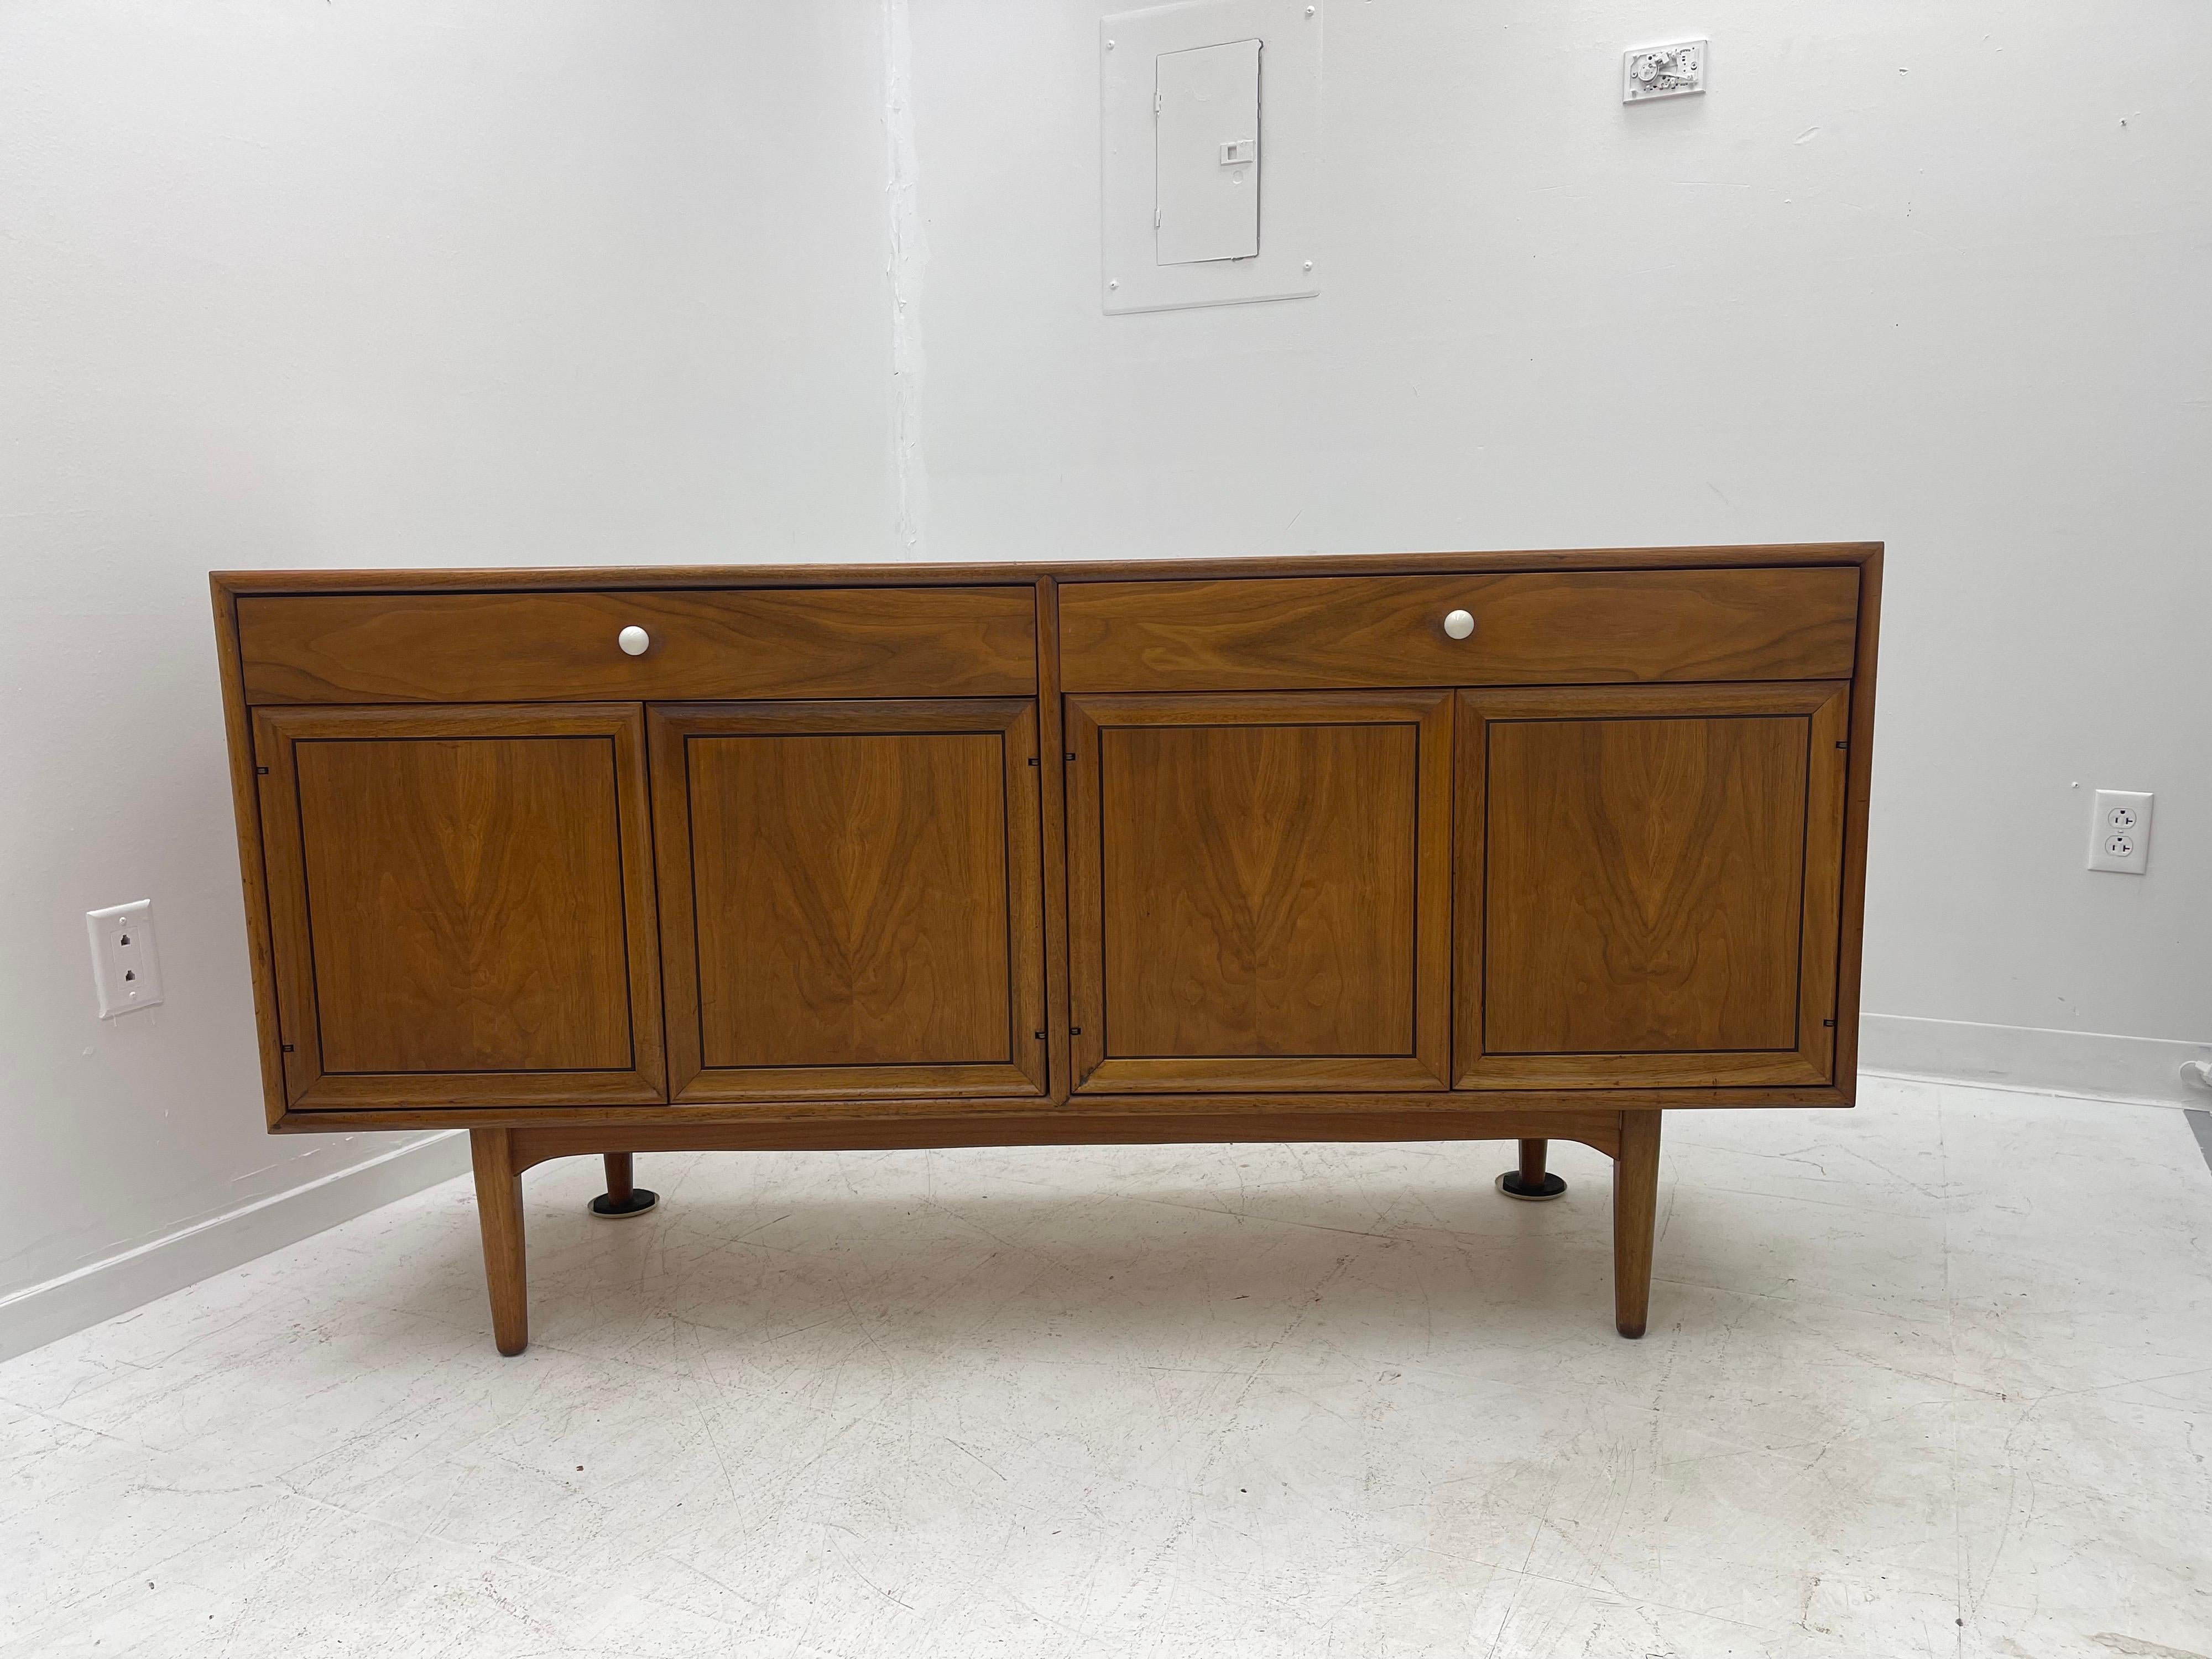 Beautiful wood grain with clean lines, this walnut sideboard was designed by Kip Stewart and Stewart MacDougall for the 